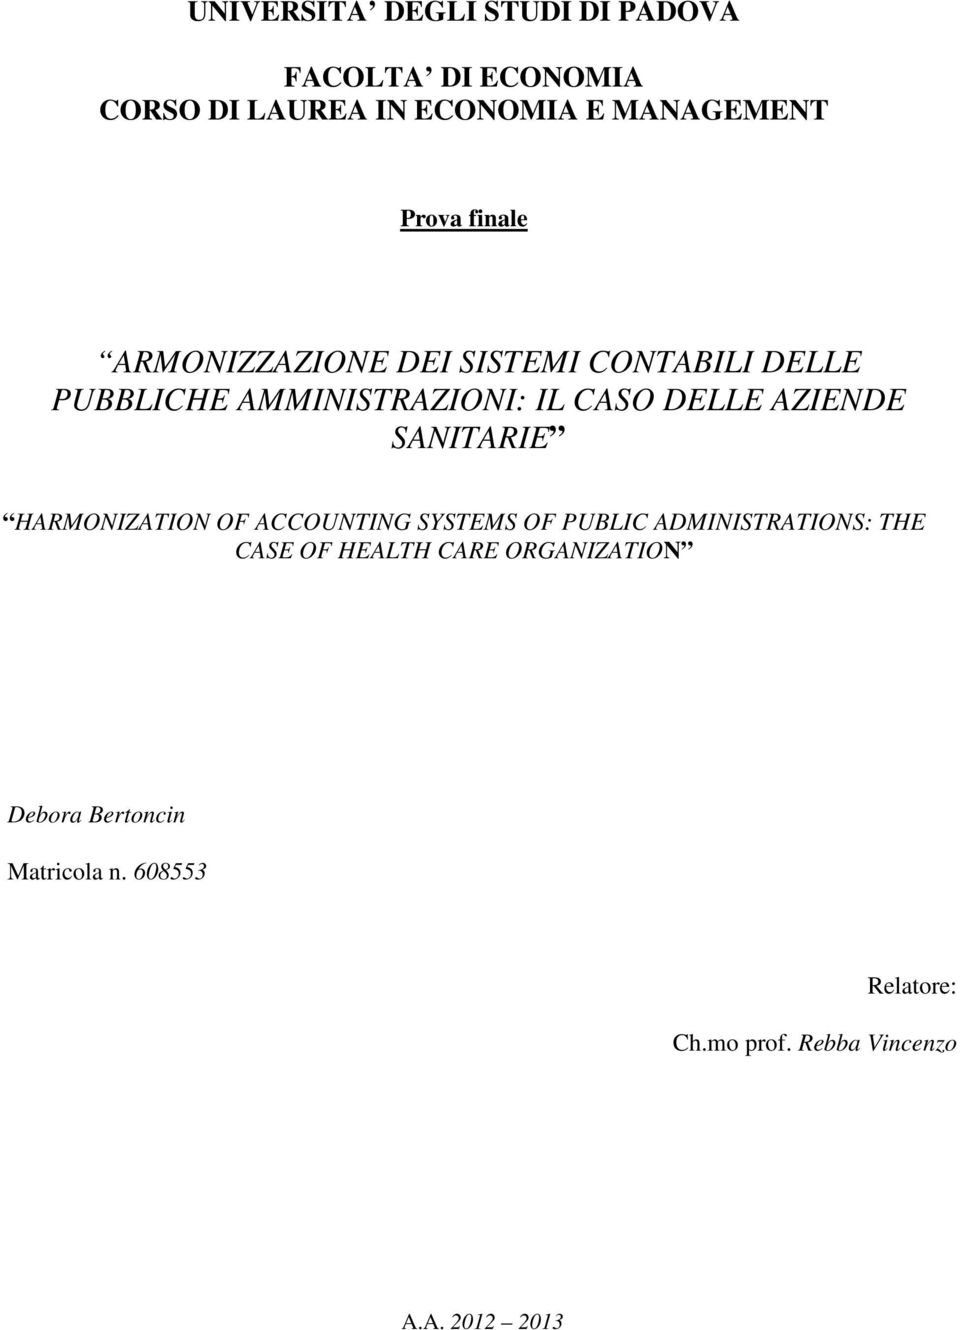 SANITARIE HARMONIZATION OF ACCOUNTING SYSTEMS OF PUBLIC ADMINISTRATIONS: THE CASE OF HEALTH CARE